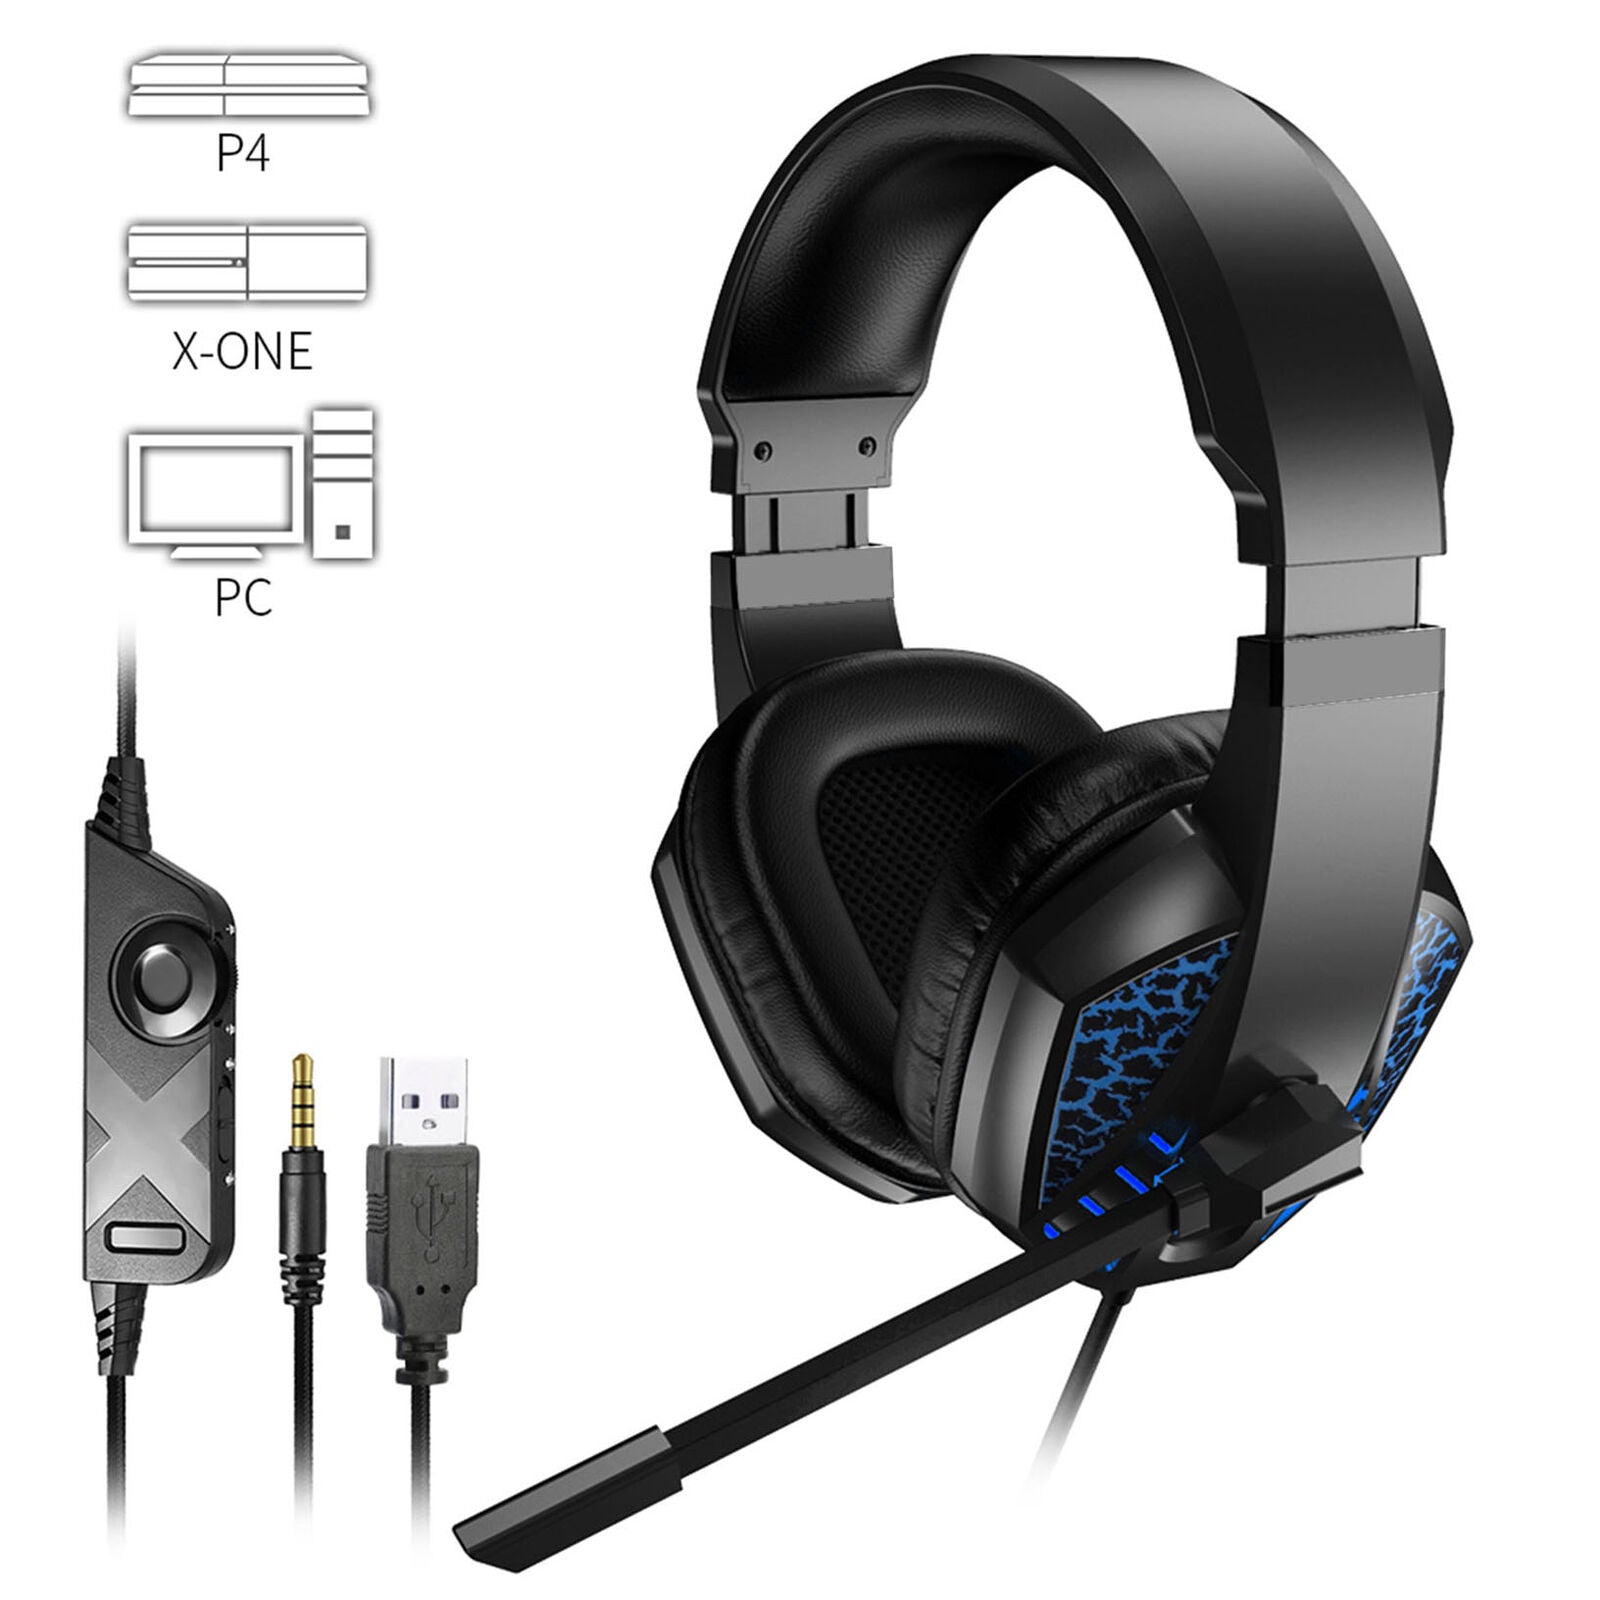 LED Gaming Headset Headphone Noise Reduction Mic Surround Sound for PS4/Xbox one